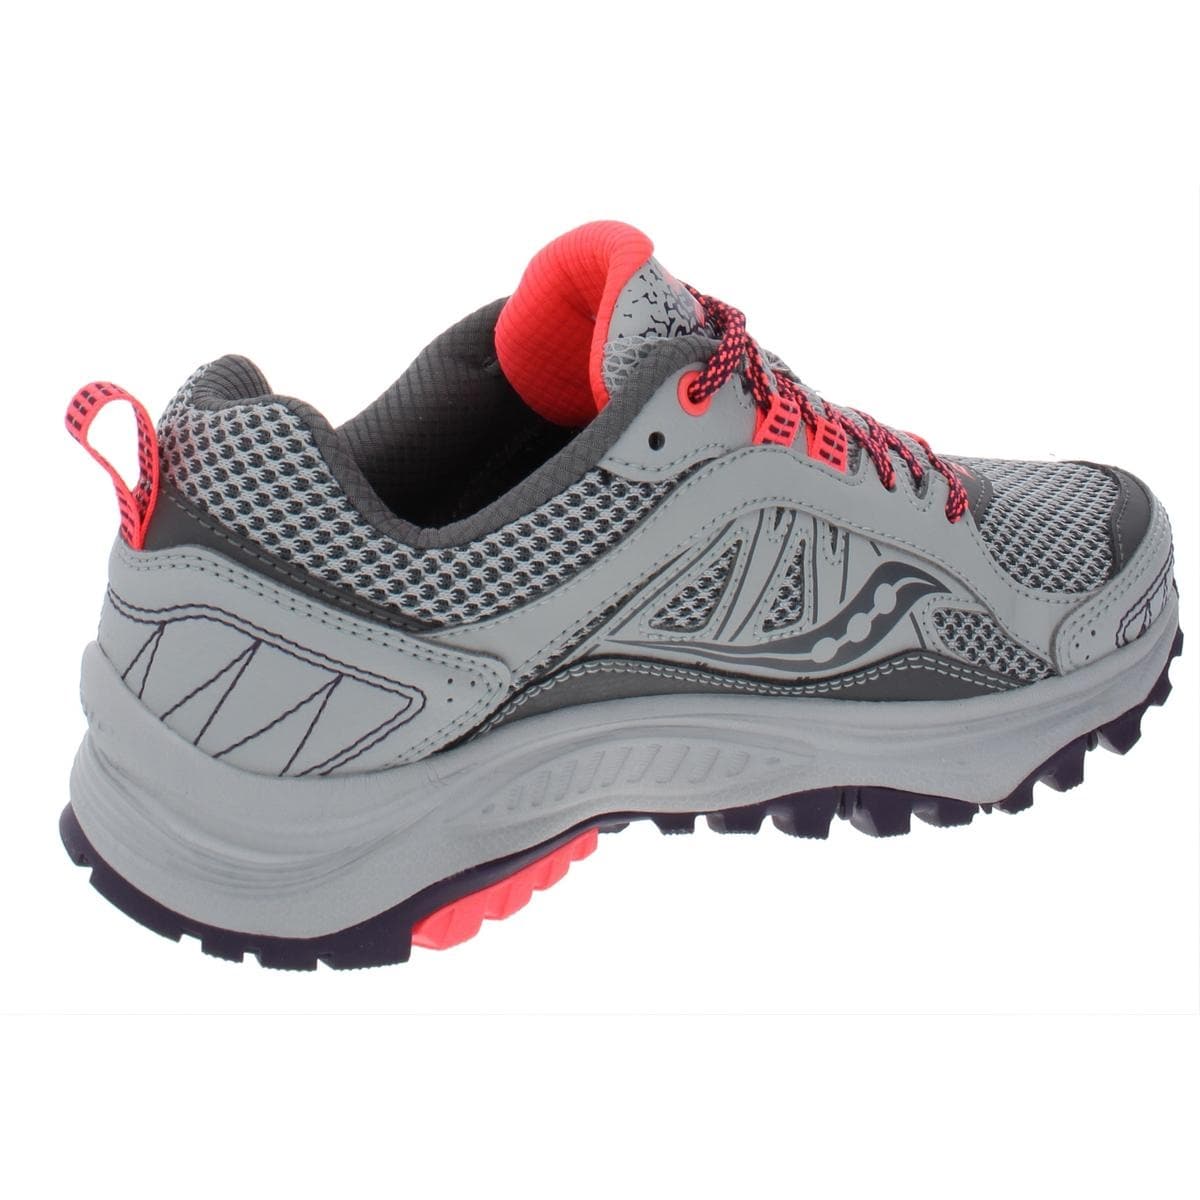 saucony women's excursion tr 9 trail running shoes